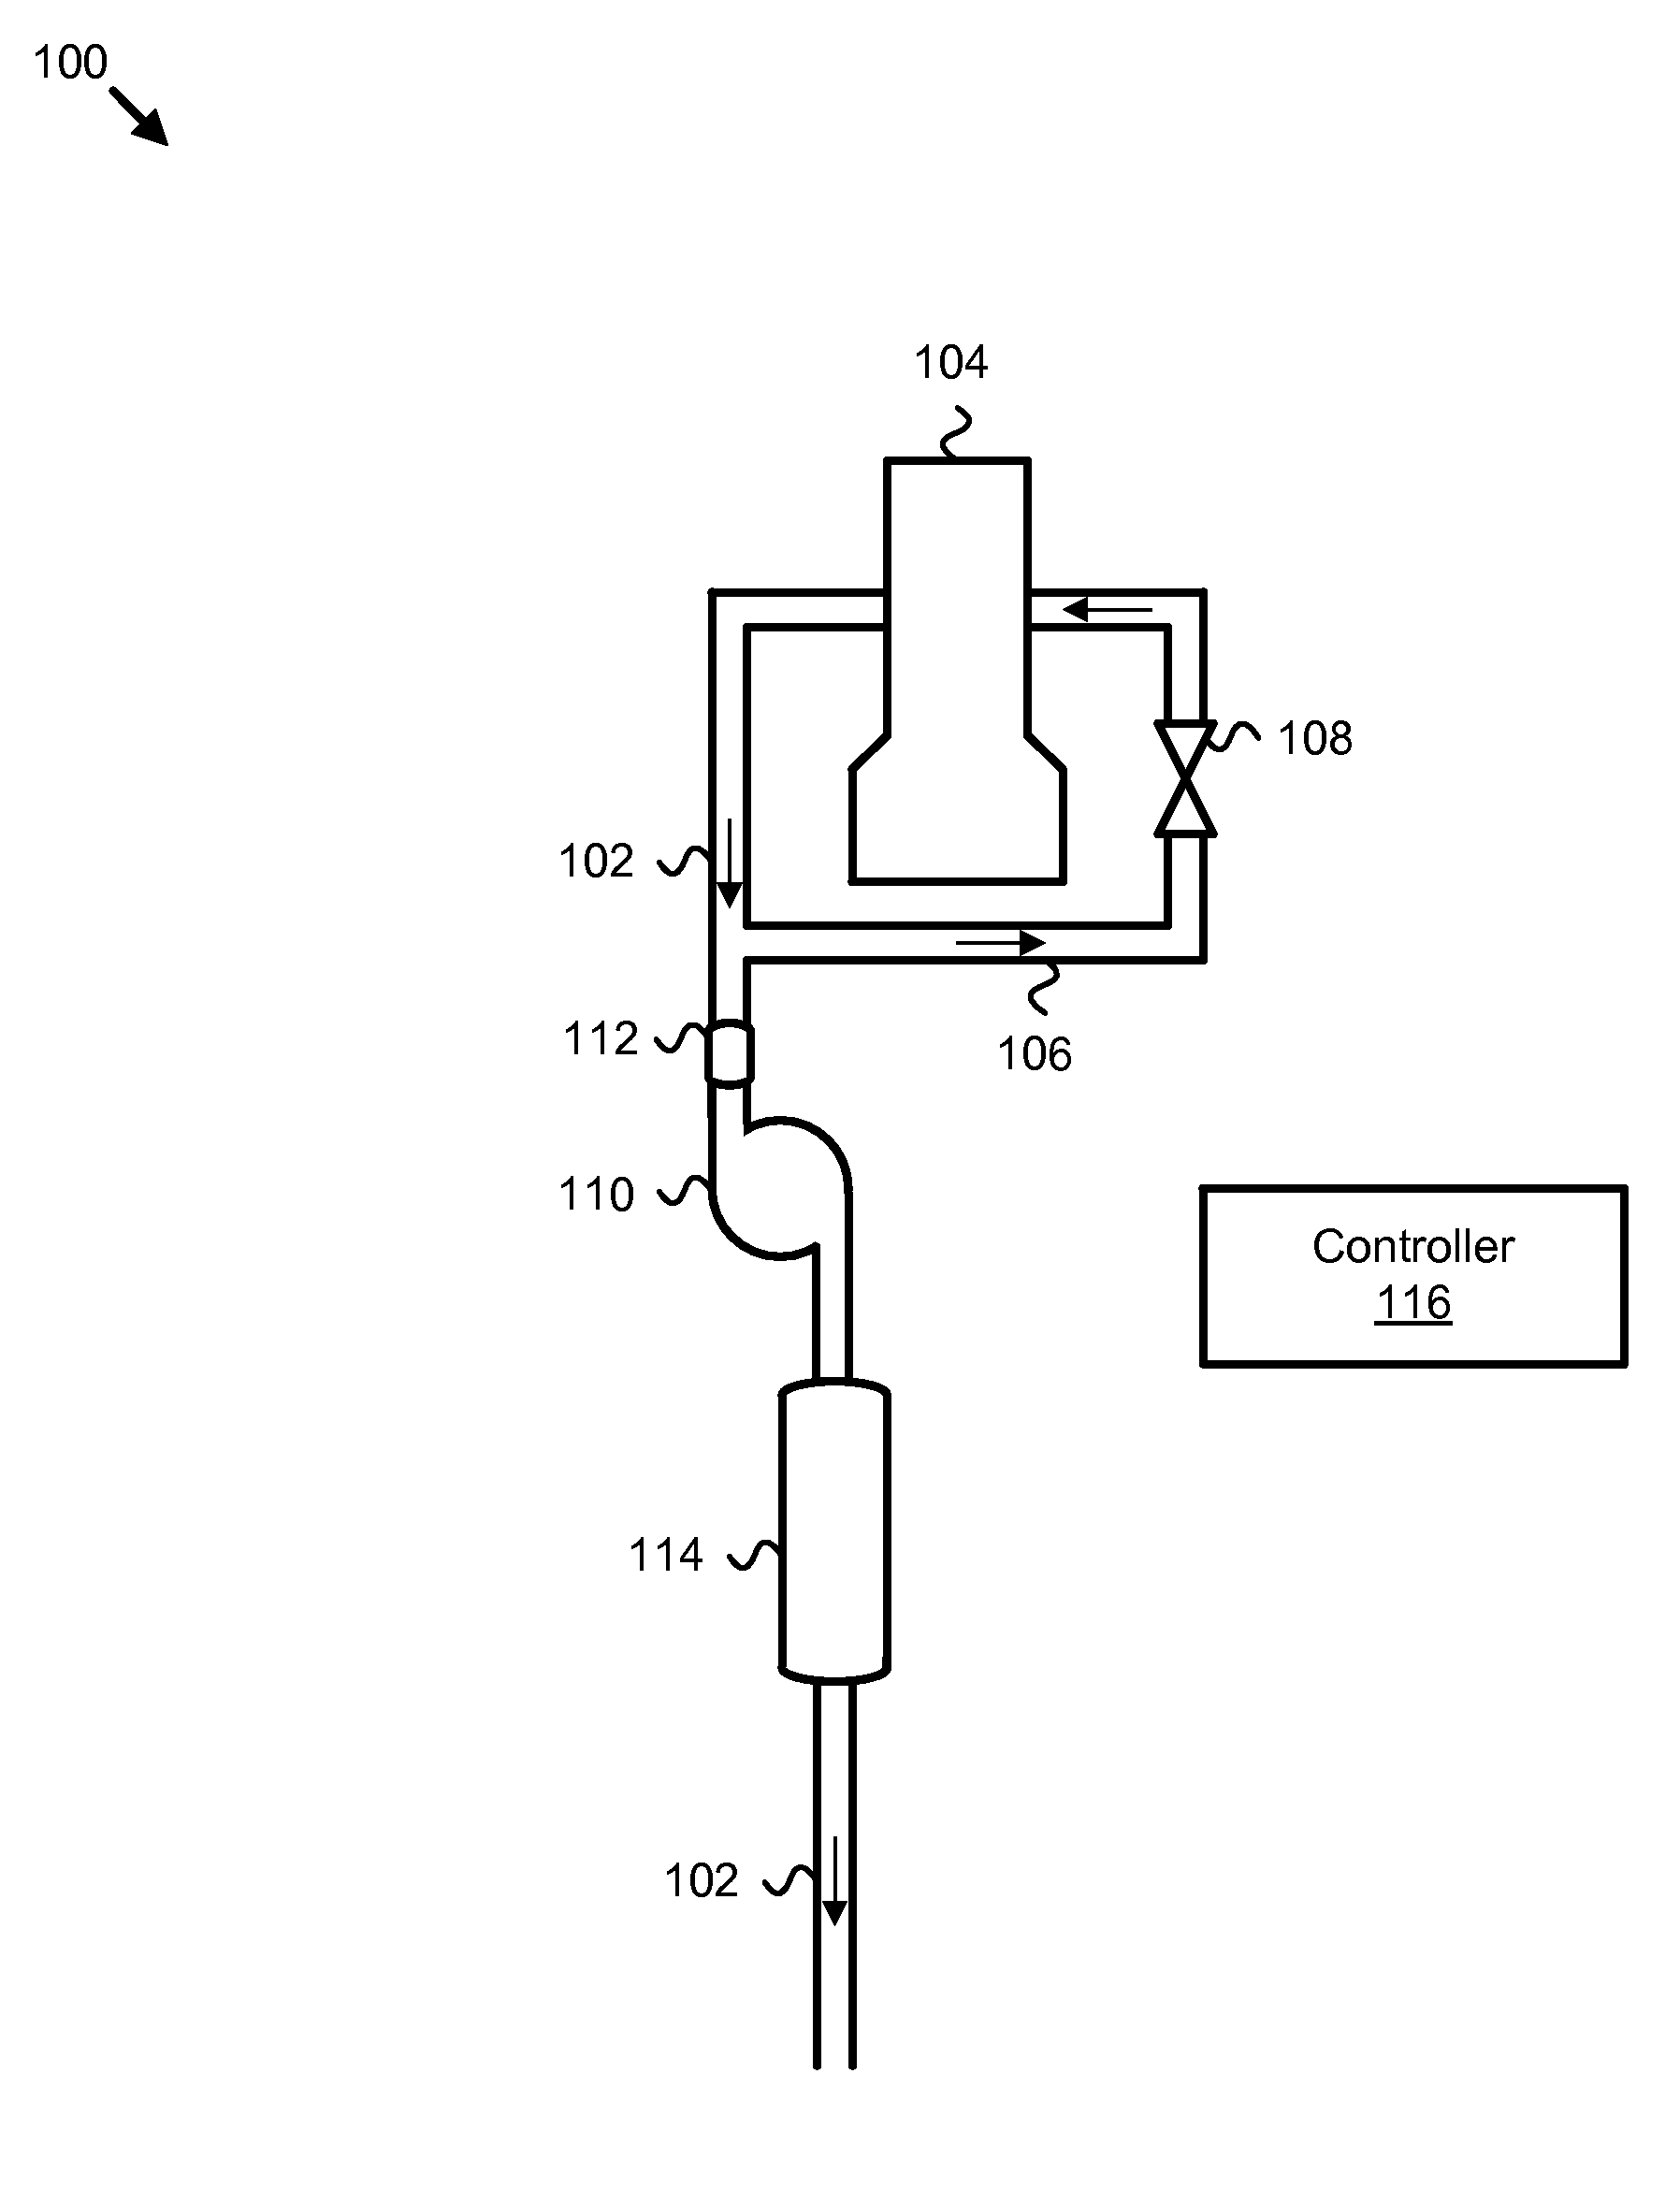 Apparatus, system, and method for efficiently increasing exhaust flow temperature for an internal combustion engine